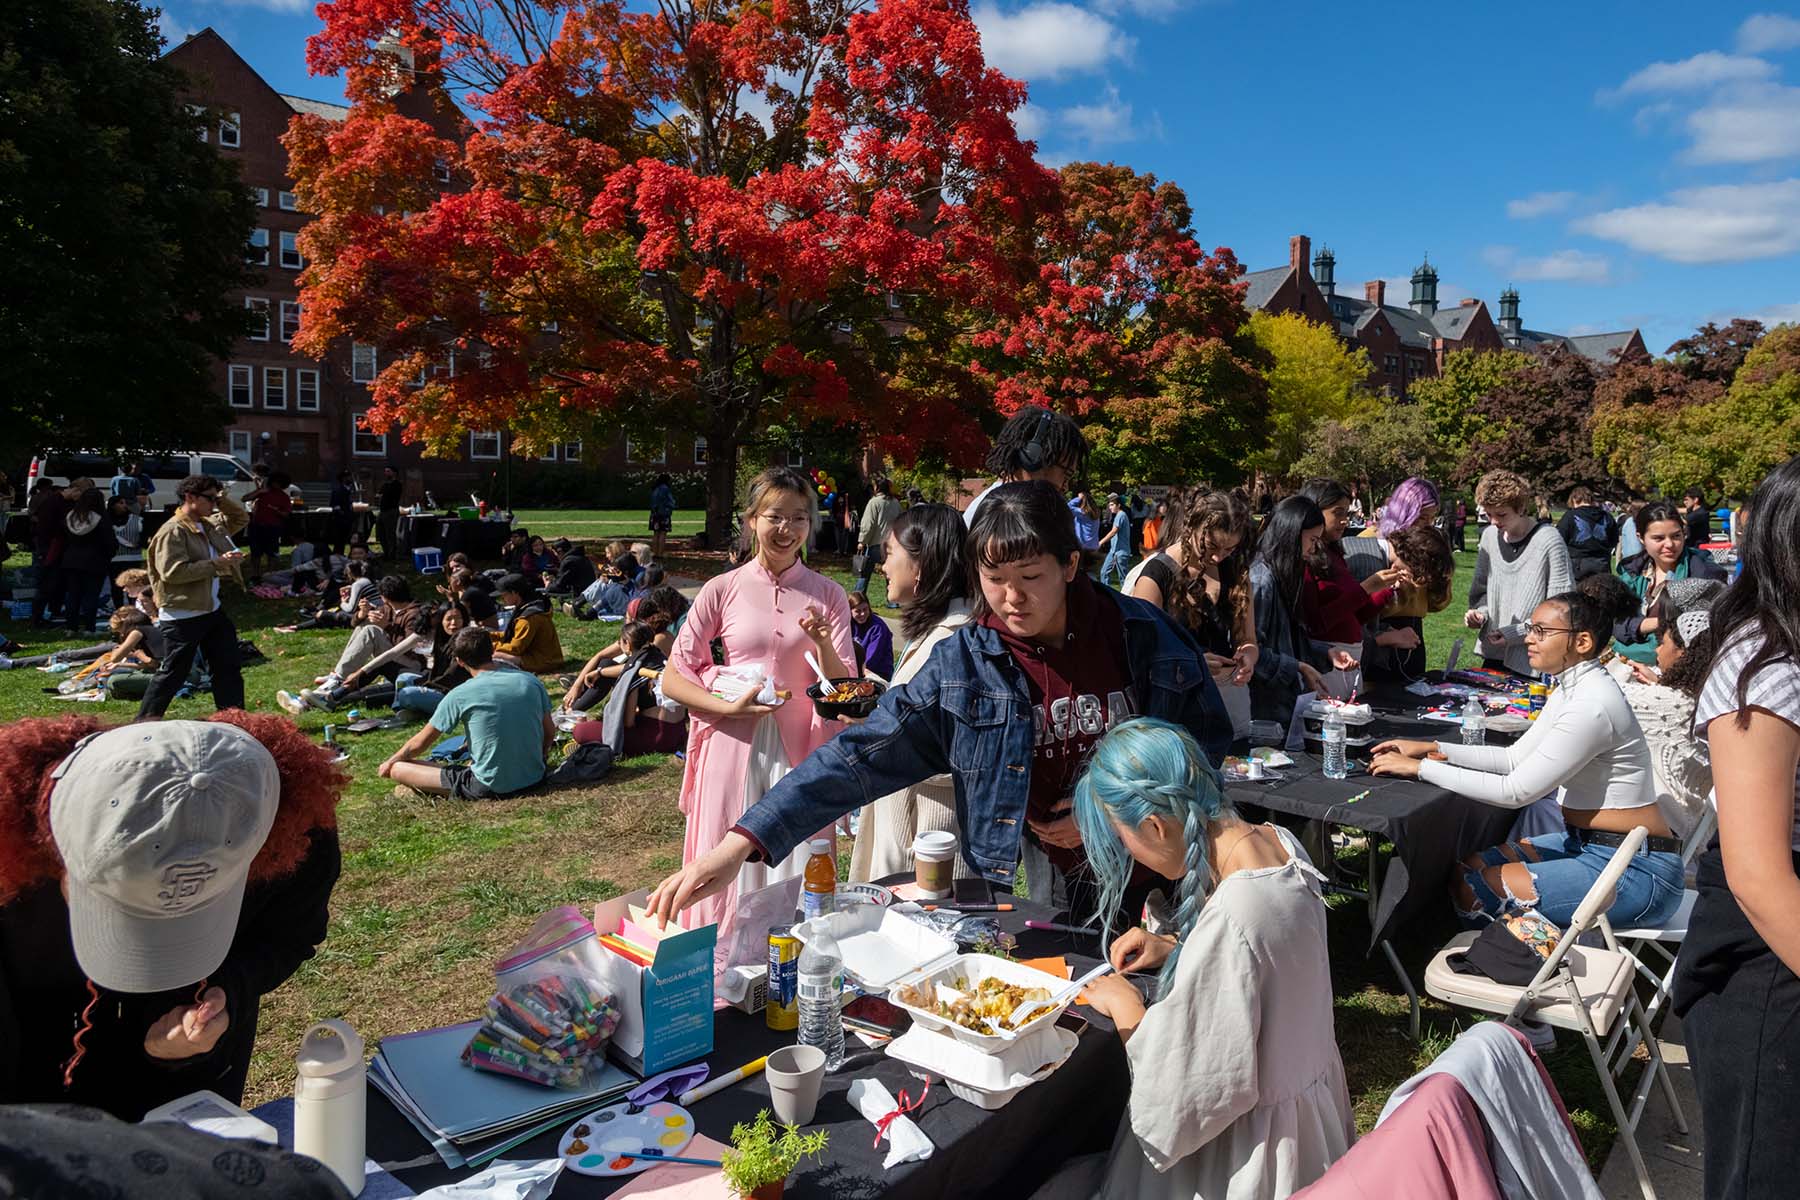 Students sitting on the grass and standing at tables with food and arts and crafts